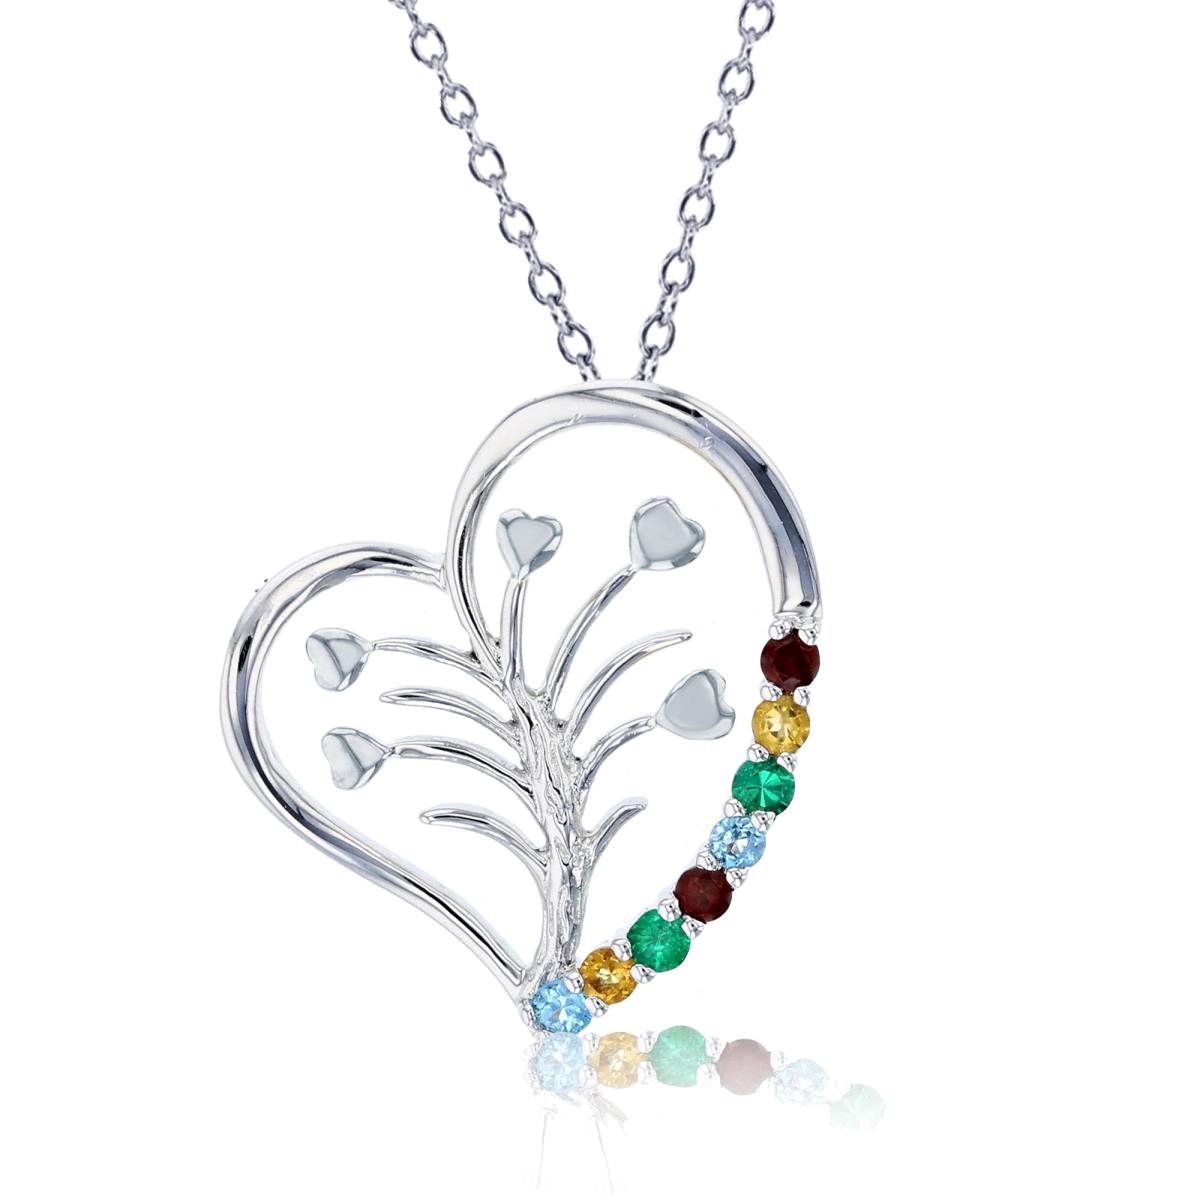 Sterling Silver+1Micron 14KY Gold 2mm Rnd Multicolor Stones Heart/Tree 18"Necklace